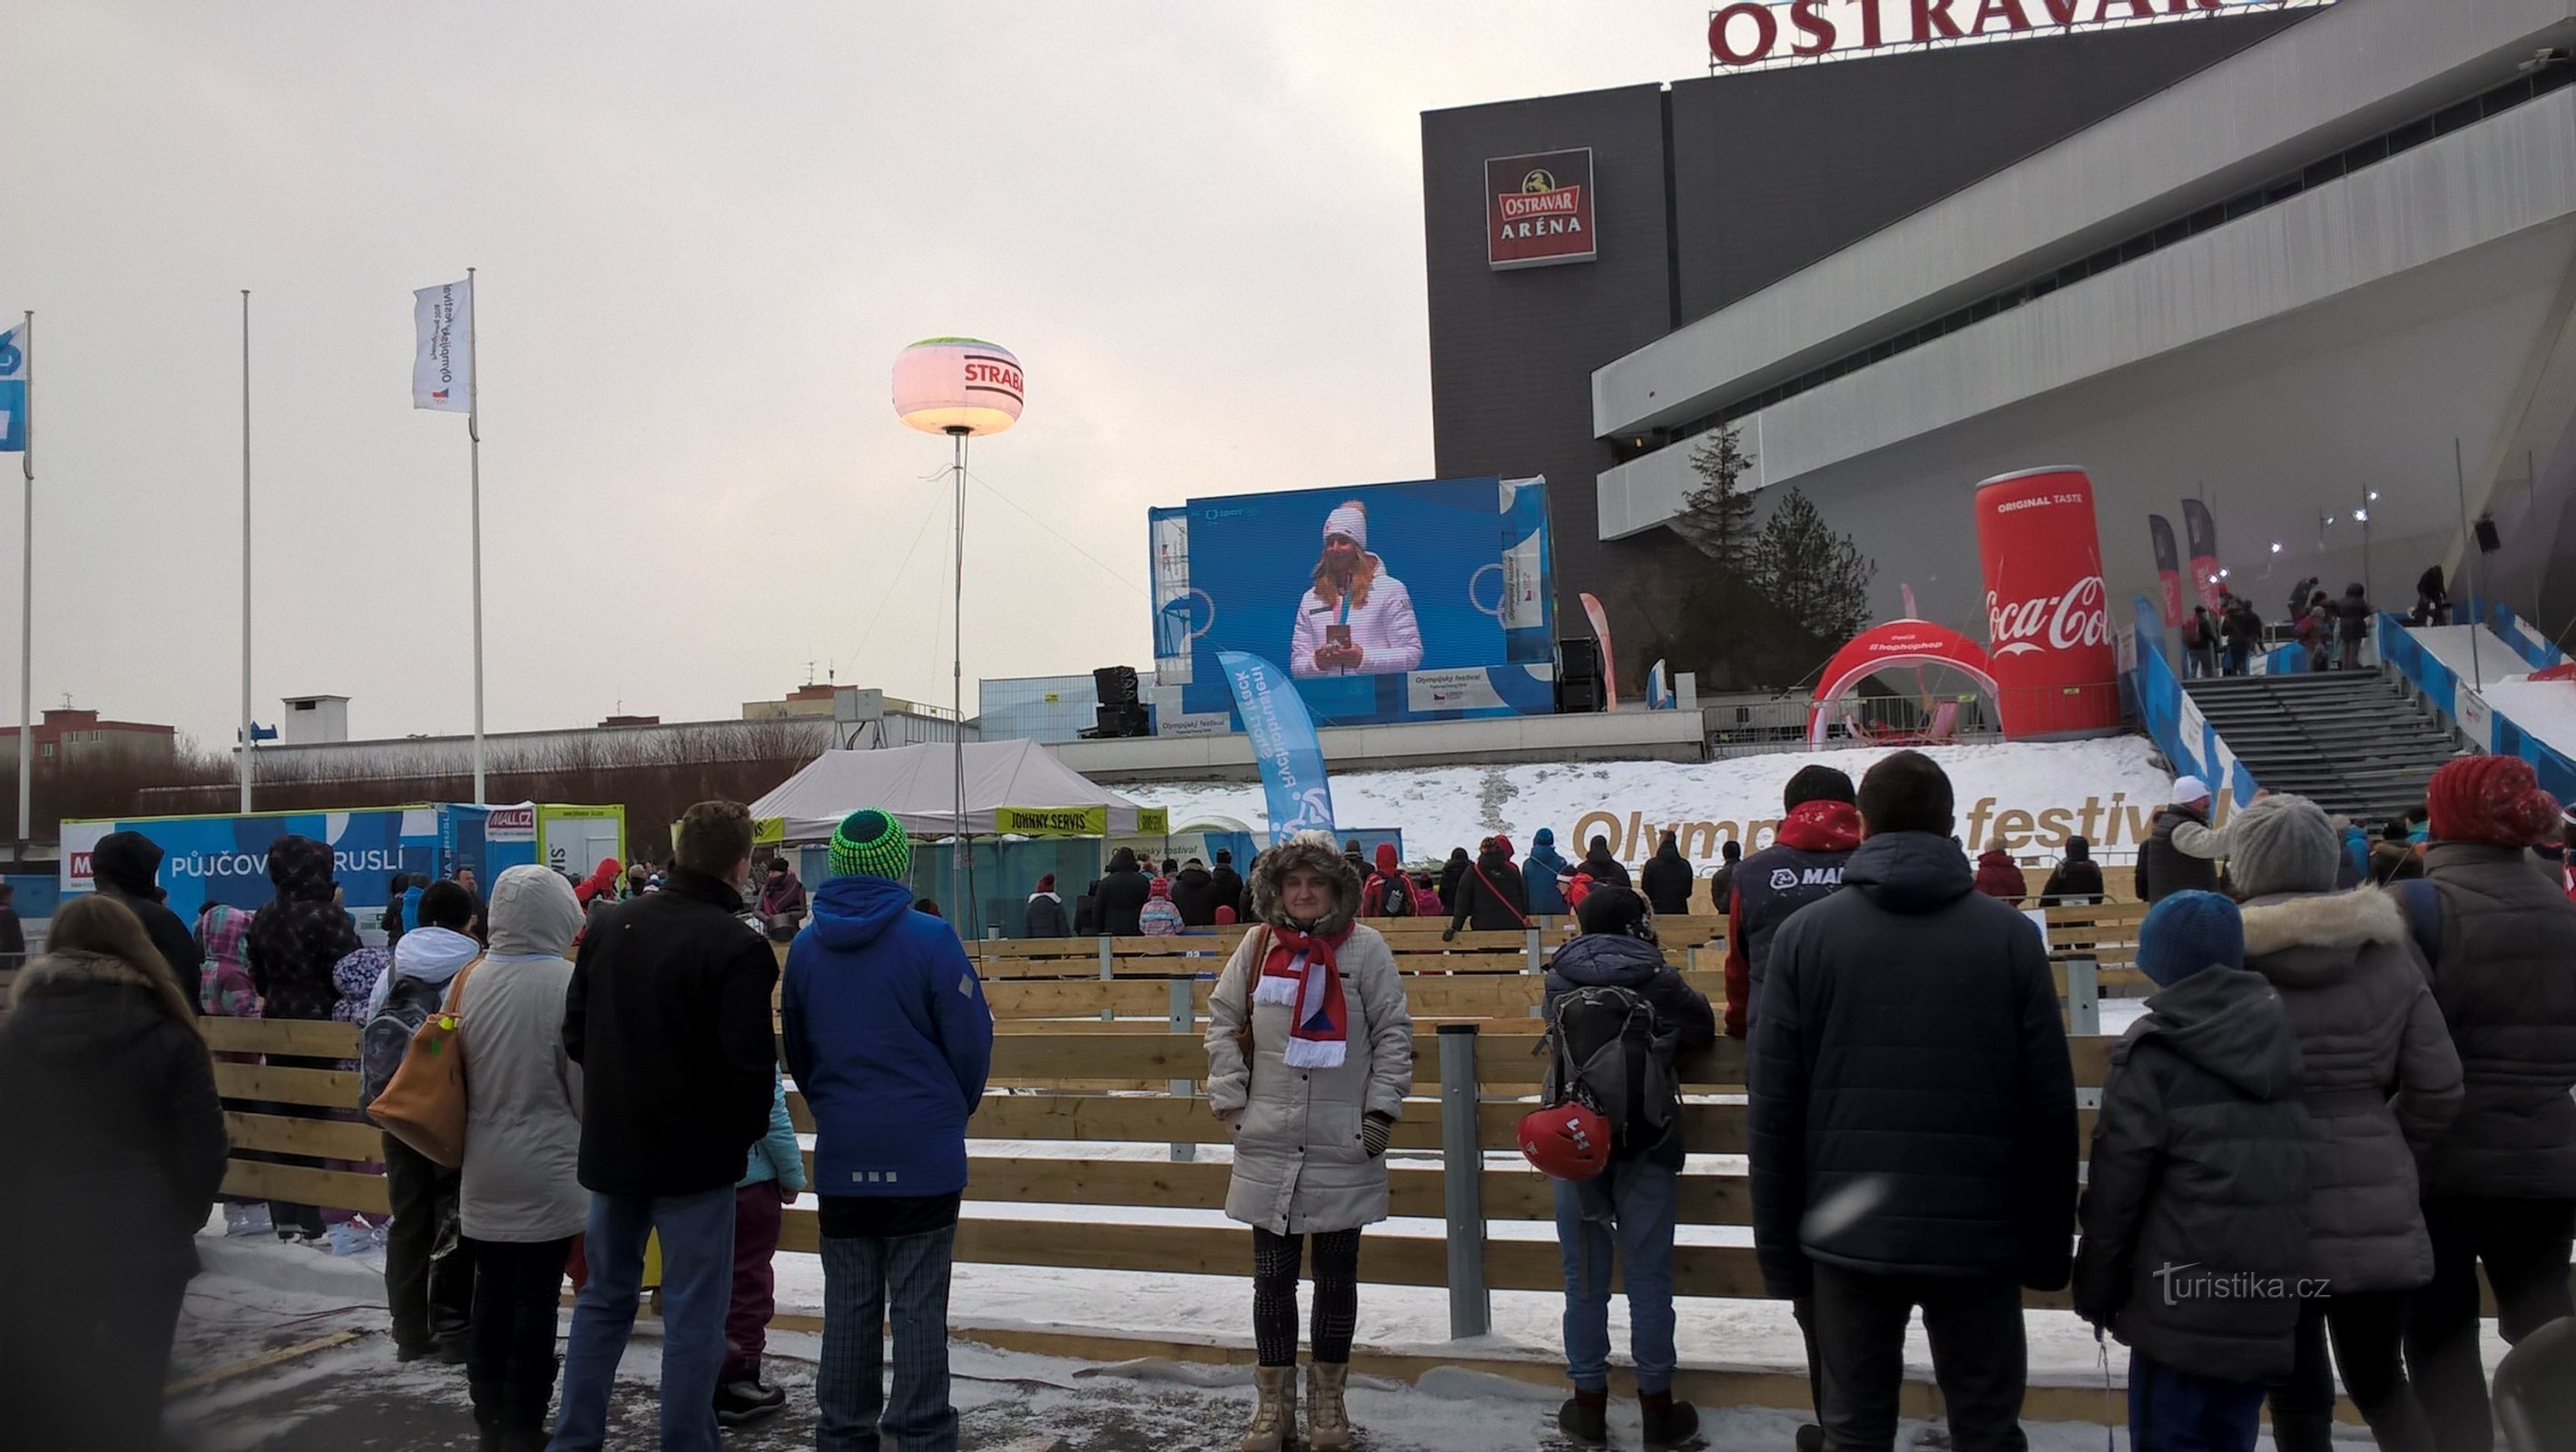 Olympisches Festival PyeongChang 2018 in Ostrava